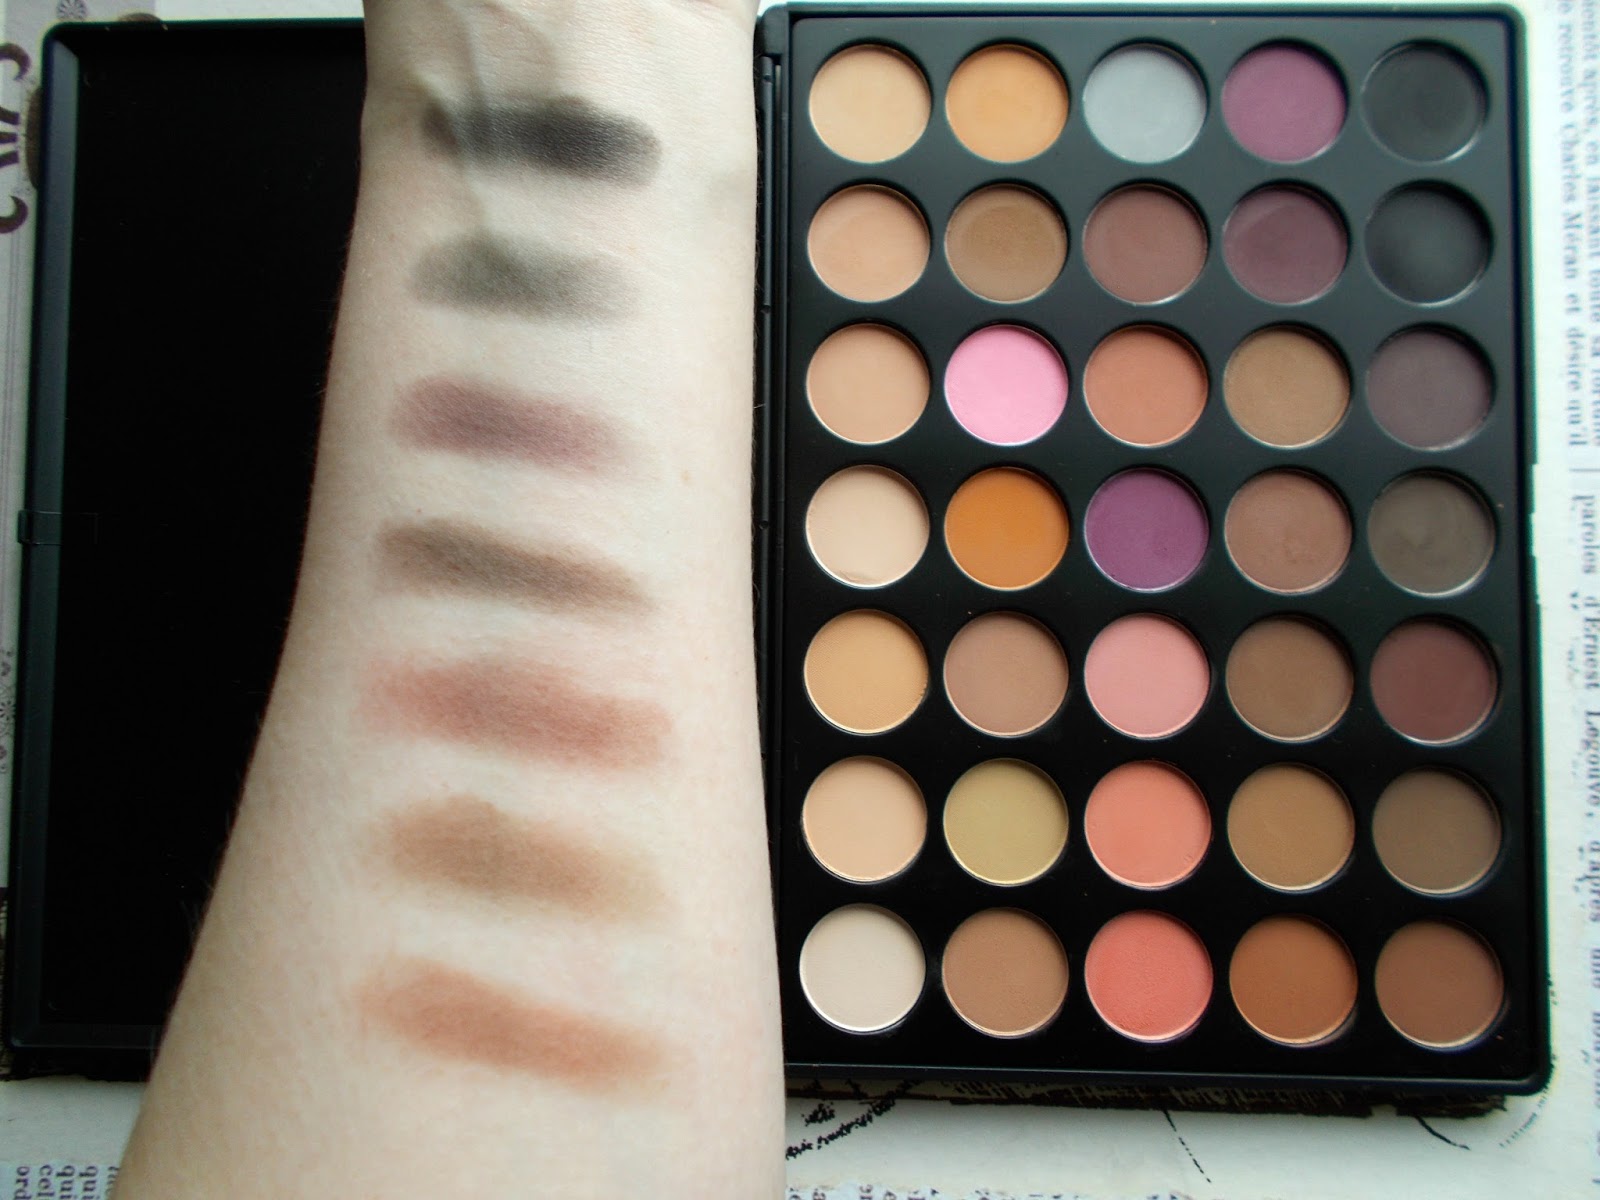 Morphe Brushes BeautyBay review 35N colour matte palette 5th row swatches